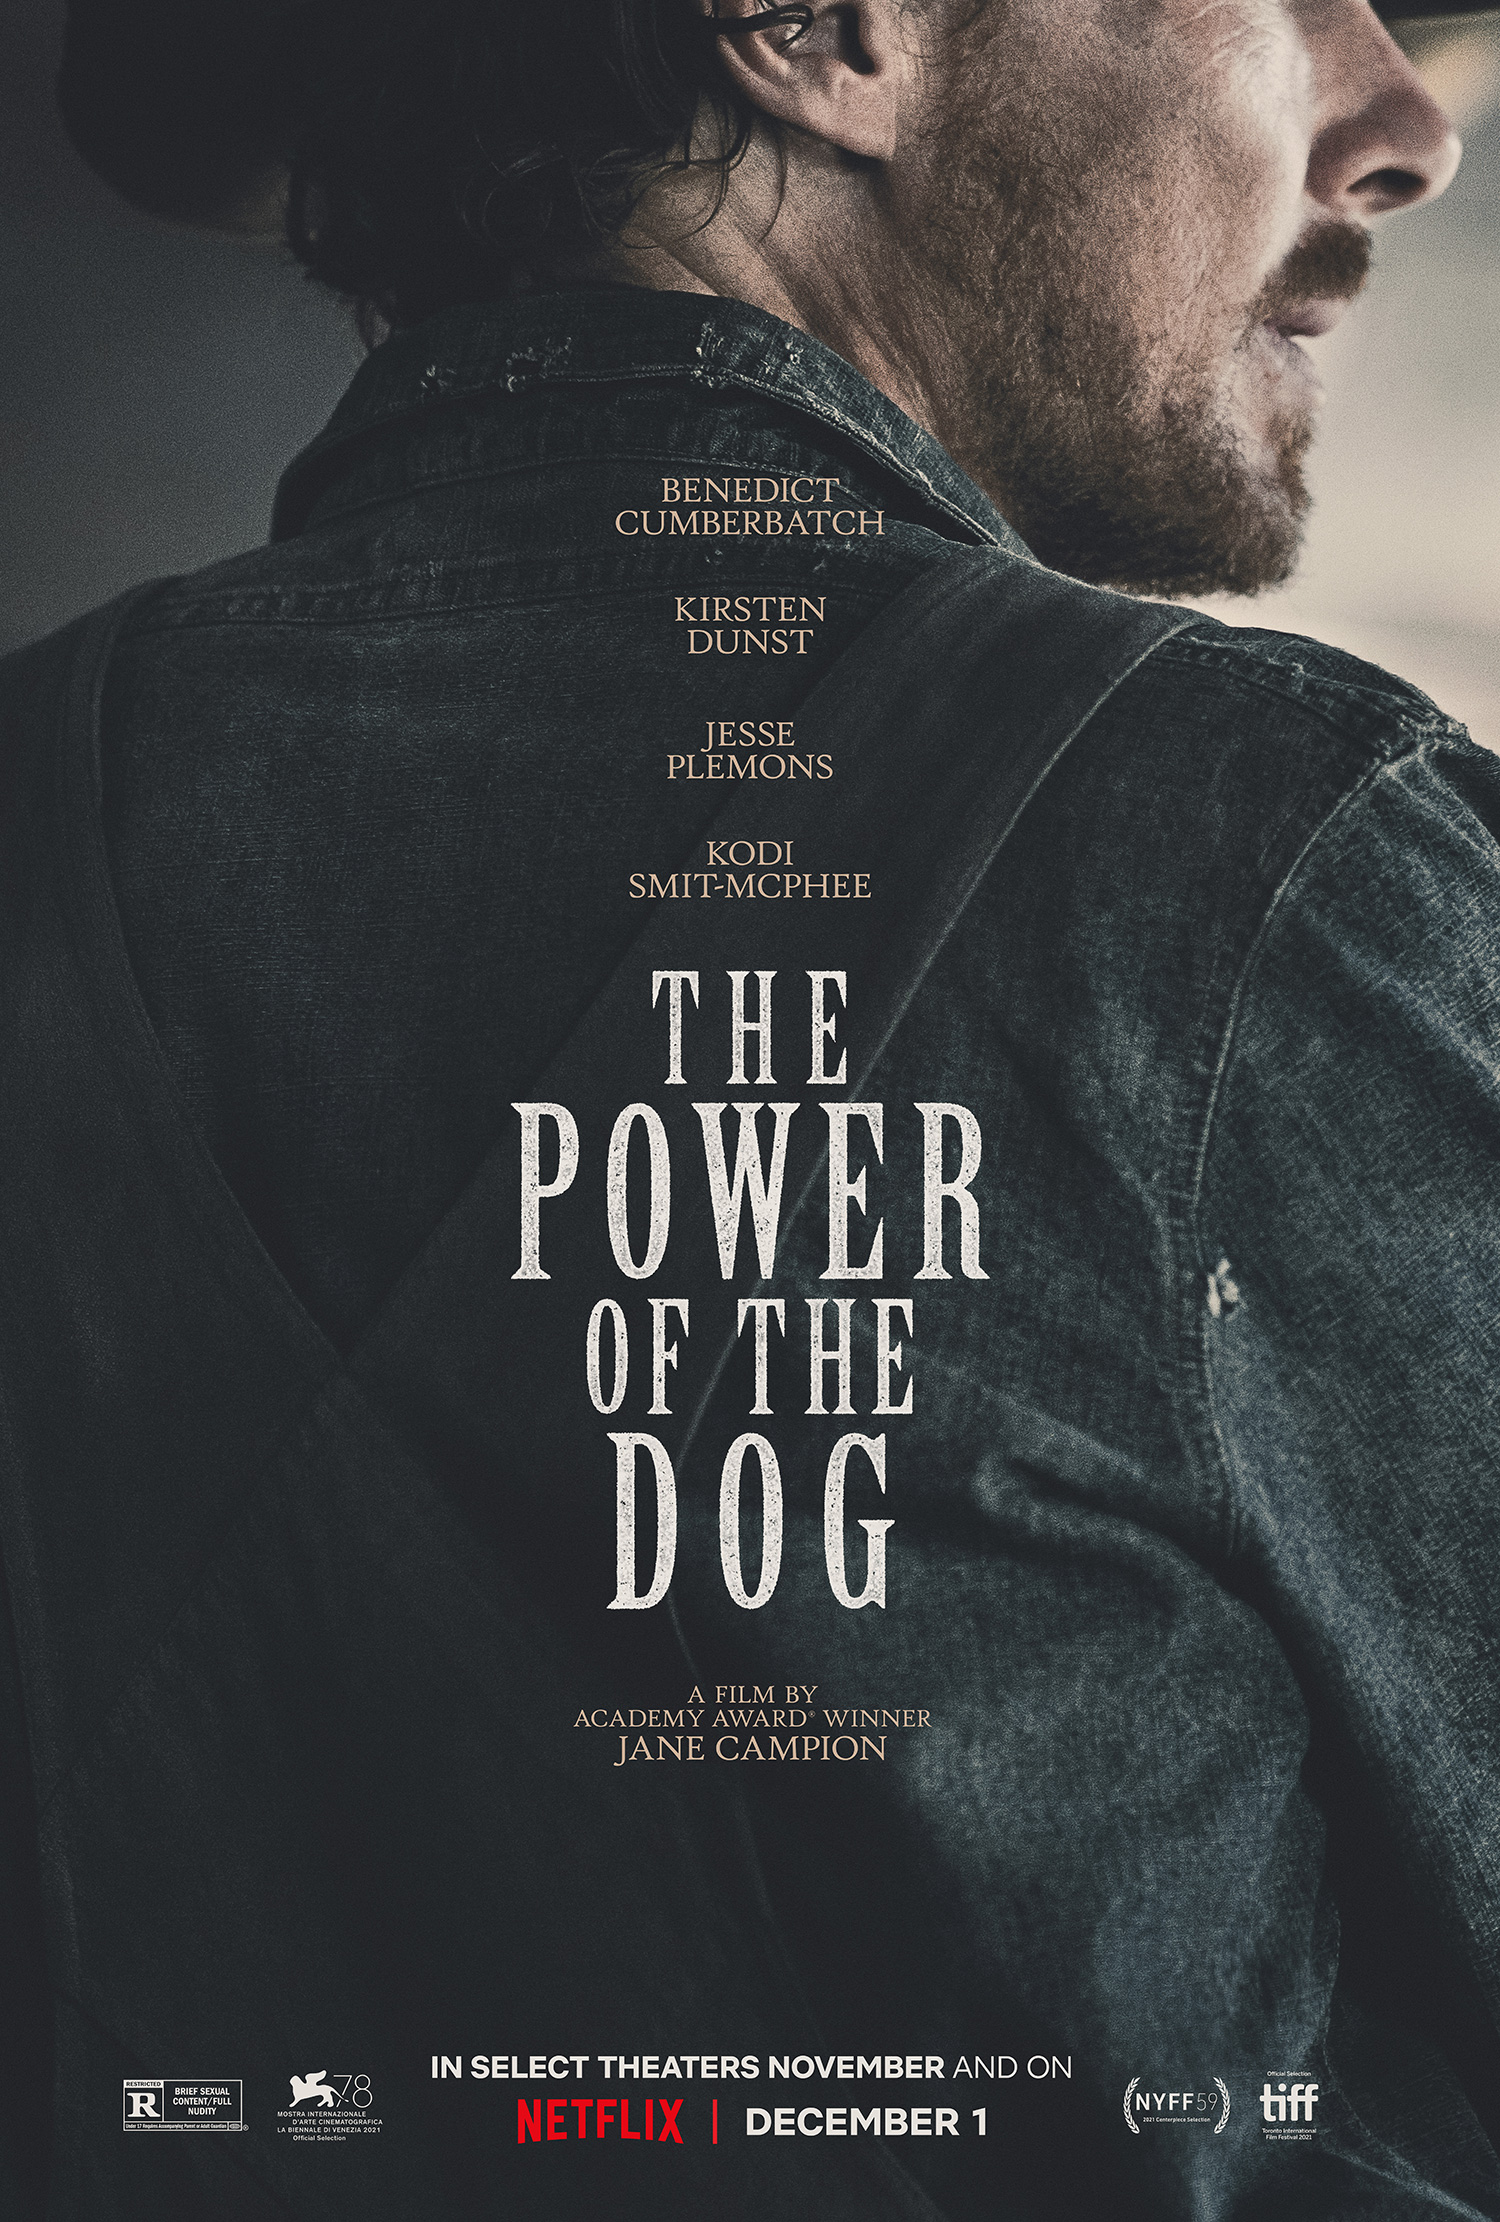 Is The Power of the Dog on Netflix